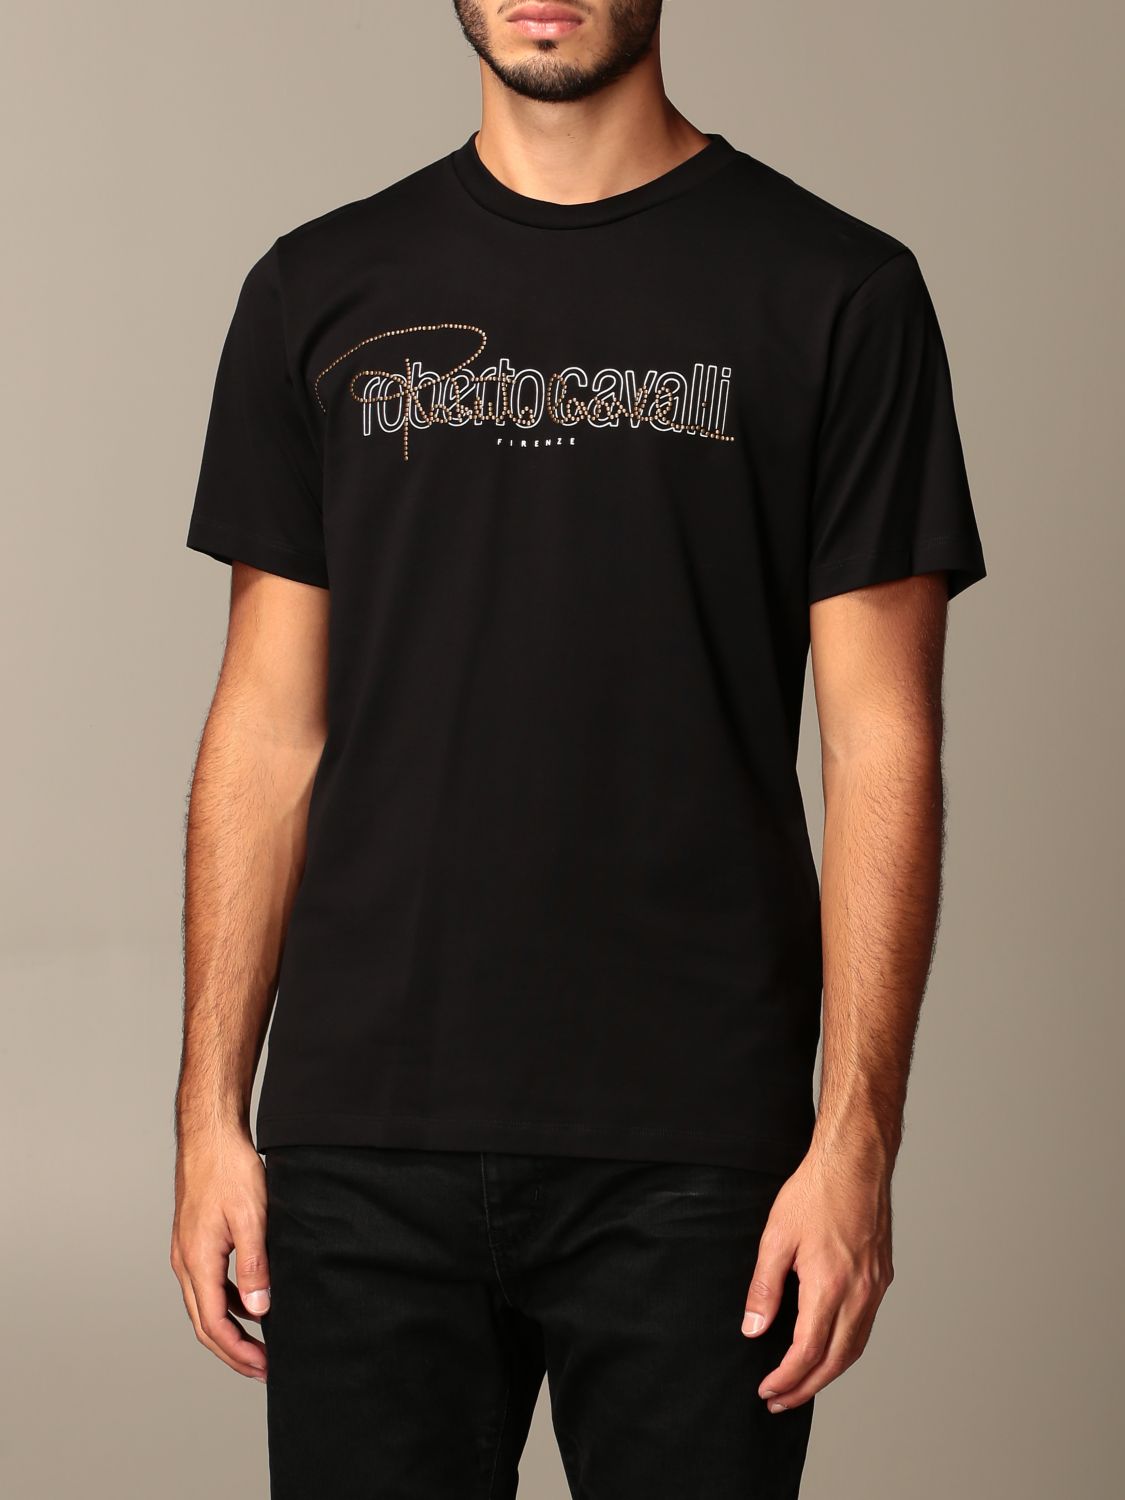 Roberto Cavalli Outlet: Just Cavalli T-shirt with logo - Black | T ...